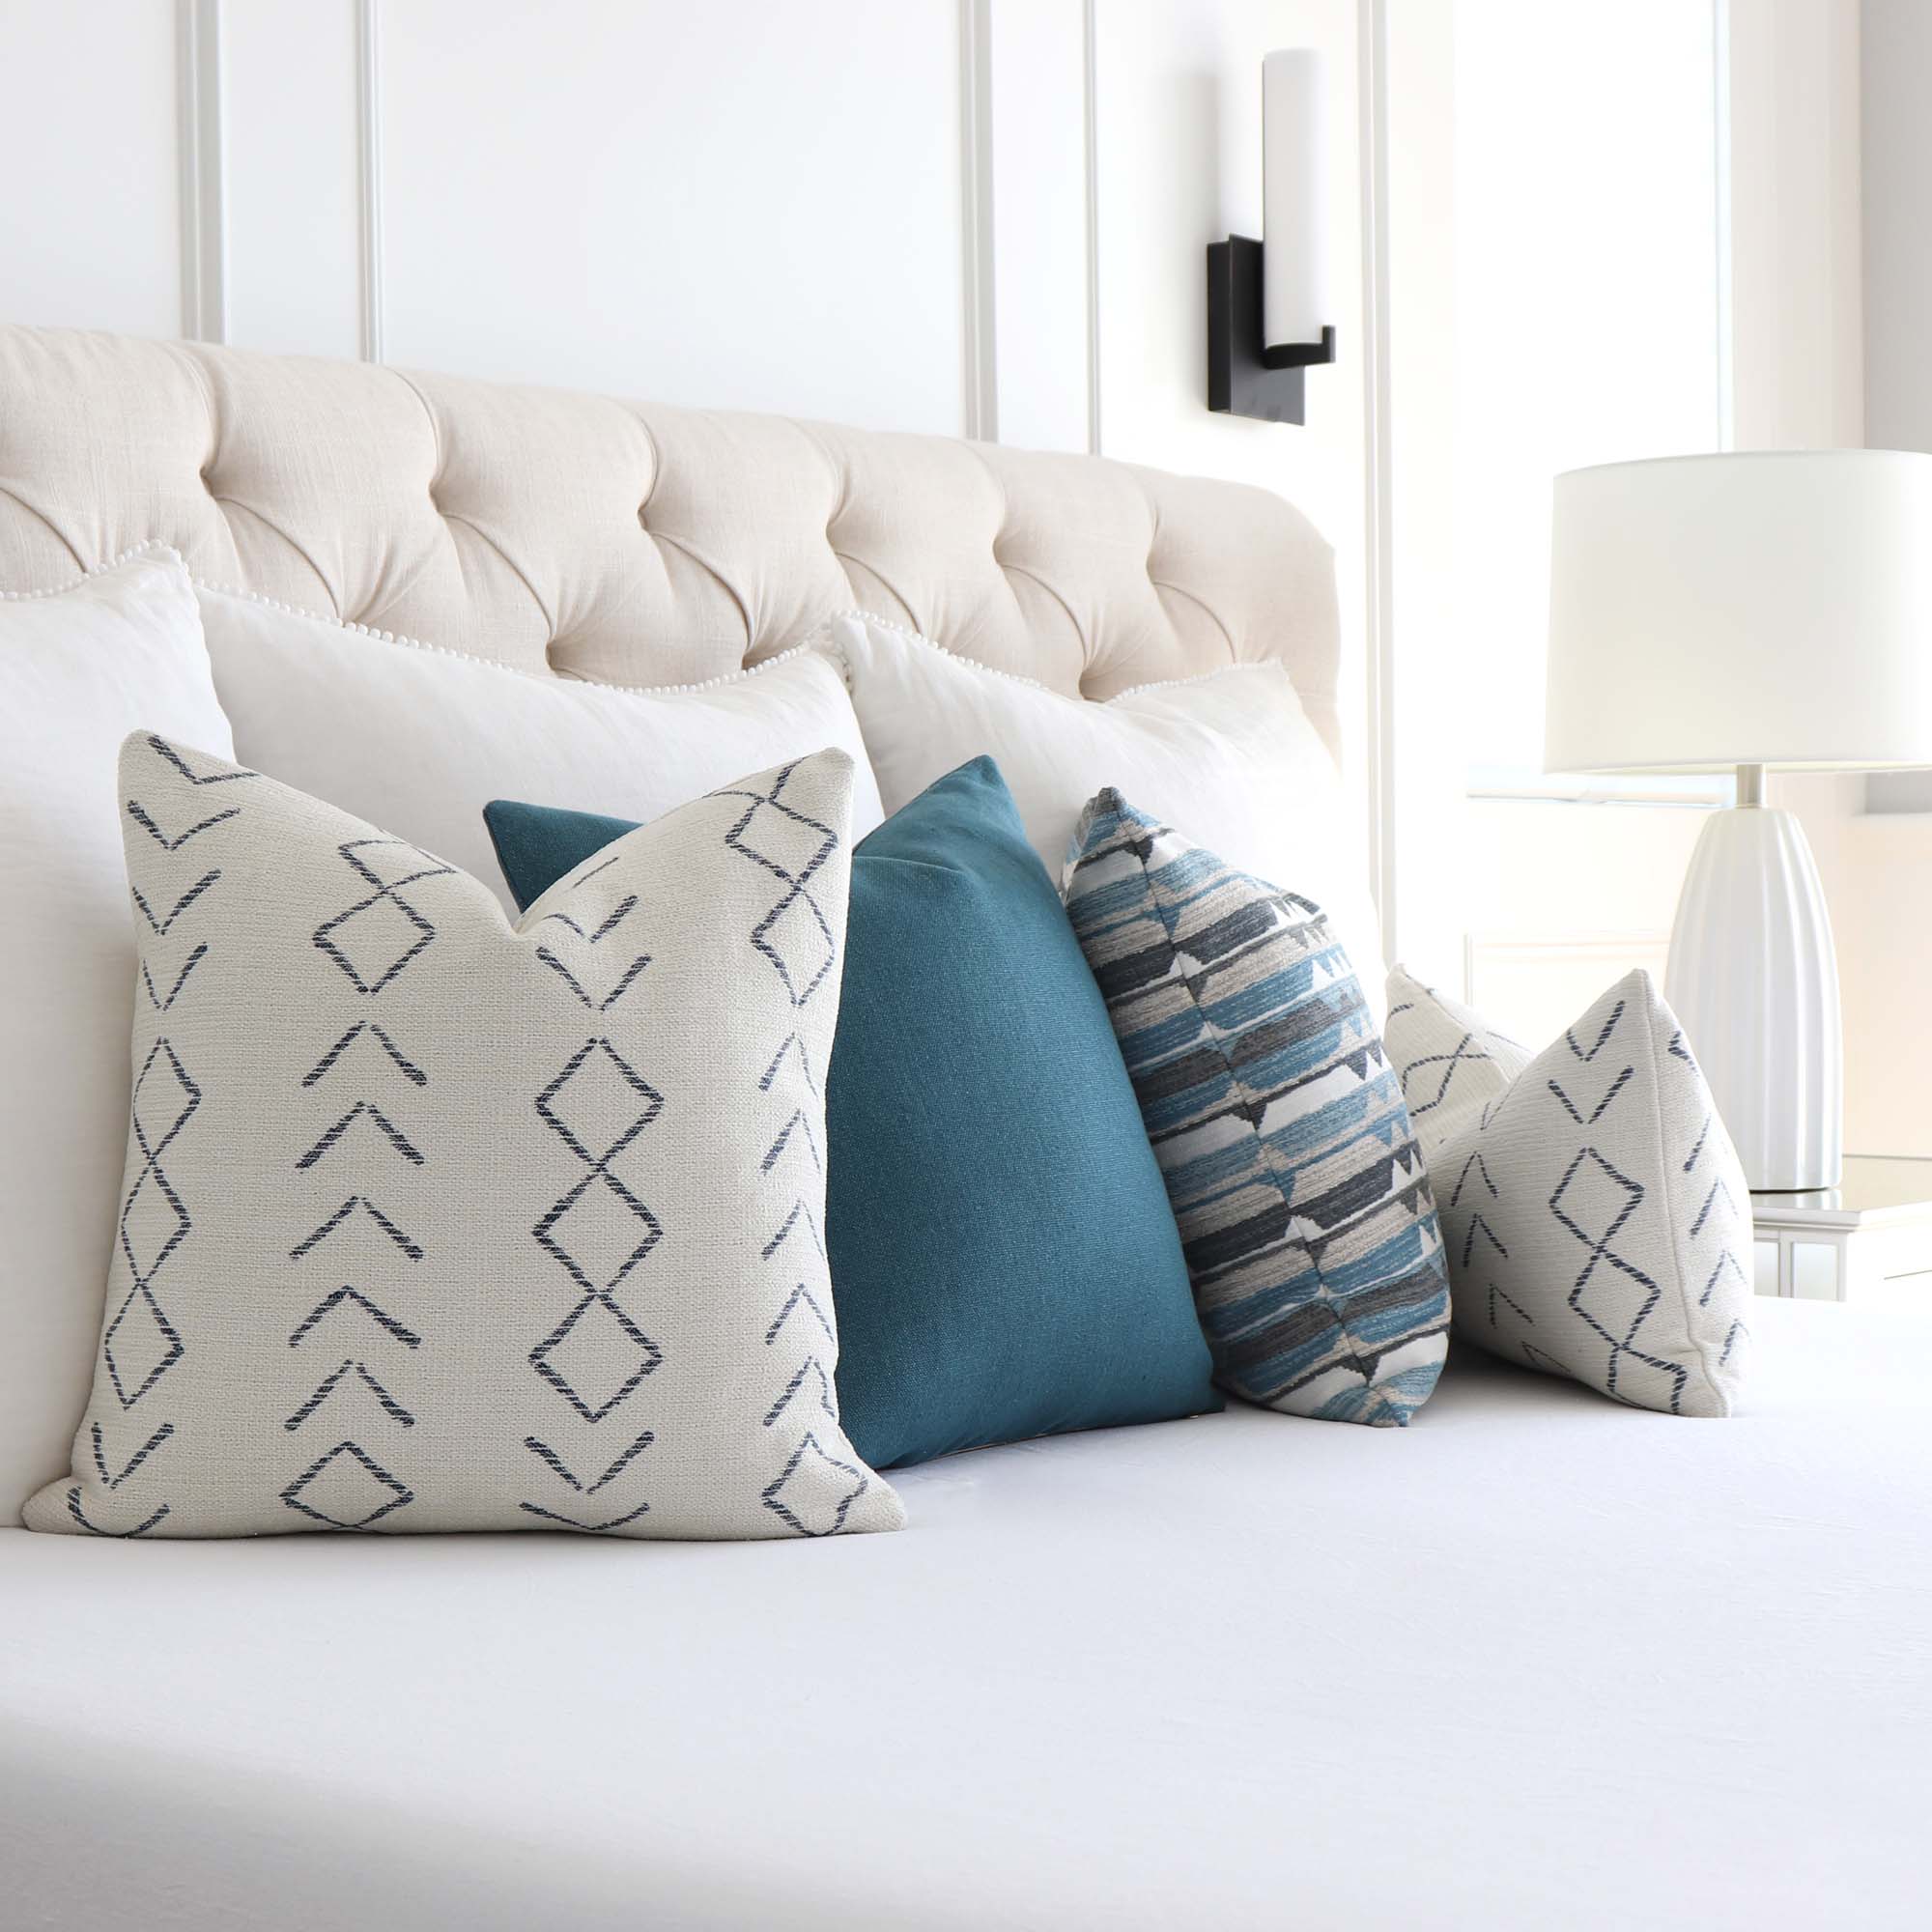 https://www.chloeandolive.com/cdn/shop/files/Thibaut_InsideOut_Performance_Fabric_Anasazi_Midnight_Blue_Woven_Striped_Designer_Luxury_Throw_Pillow_Cover_with_Coordinating_Throw_Pillows_5000x.jpg?v=1692552582